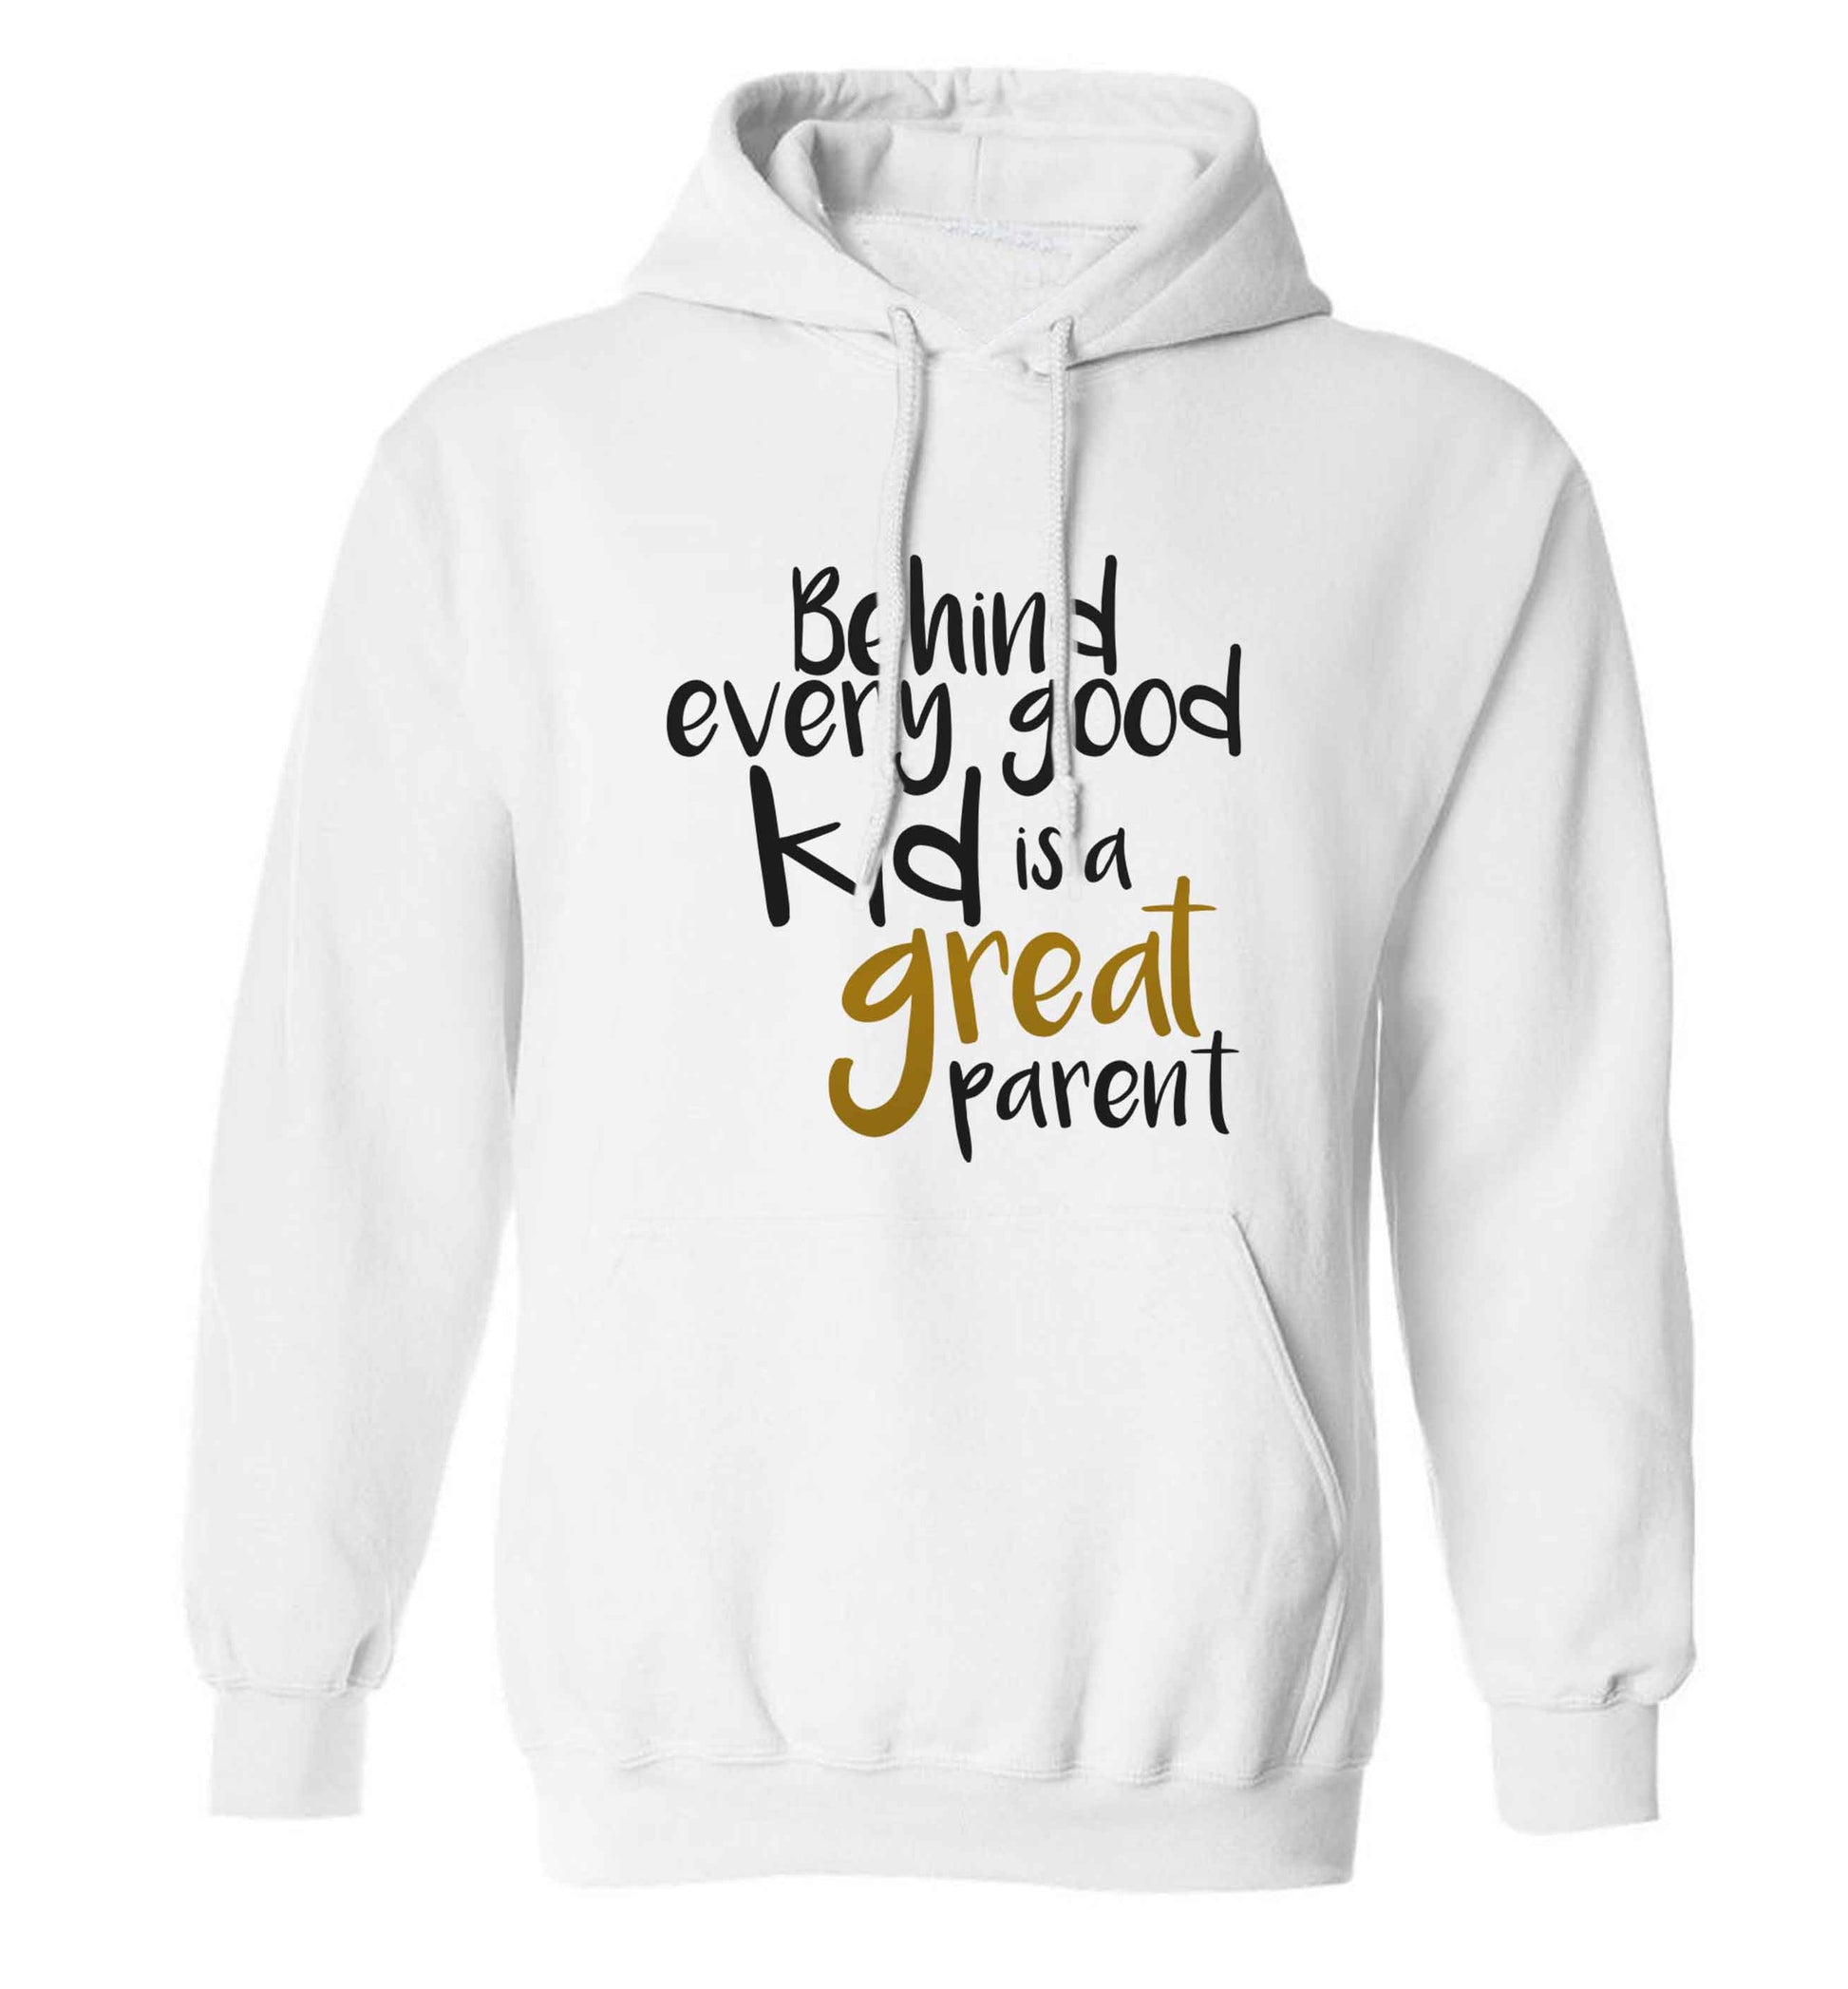 Behind every good kid is a great parent adults unisex white hoodie 2XL